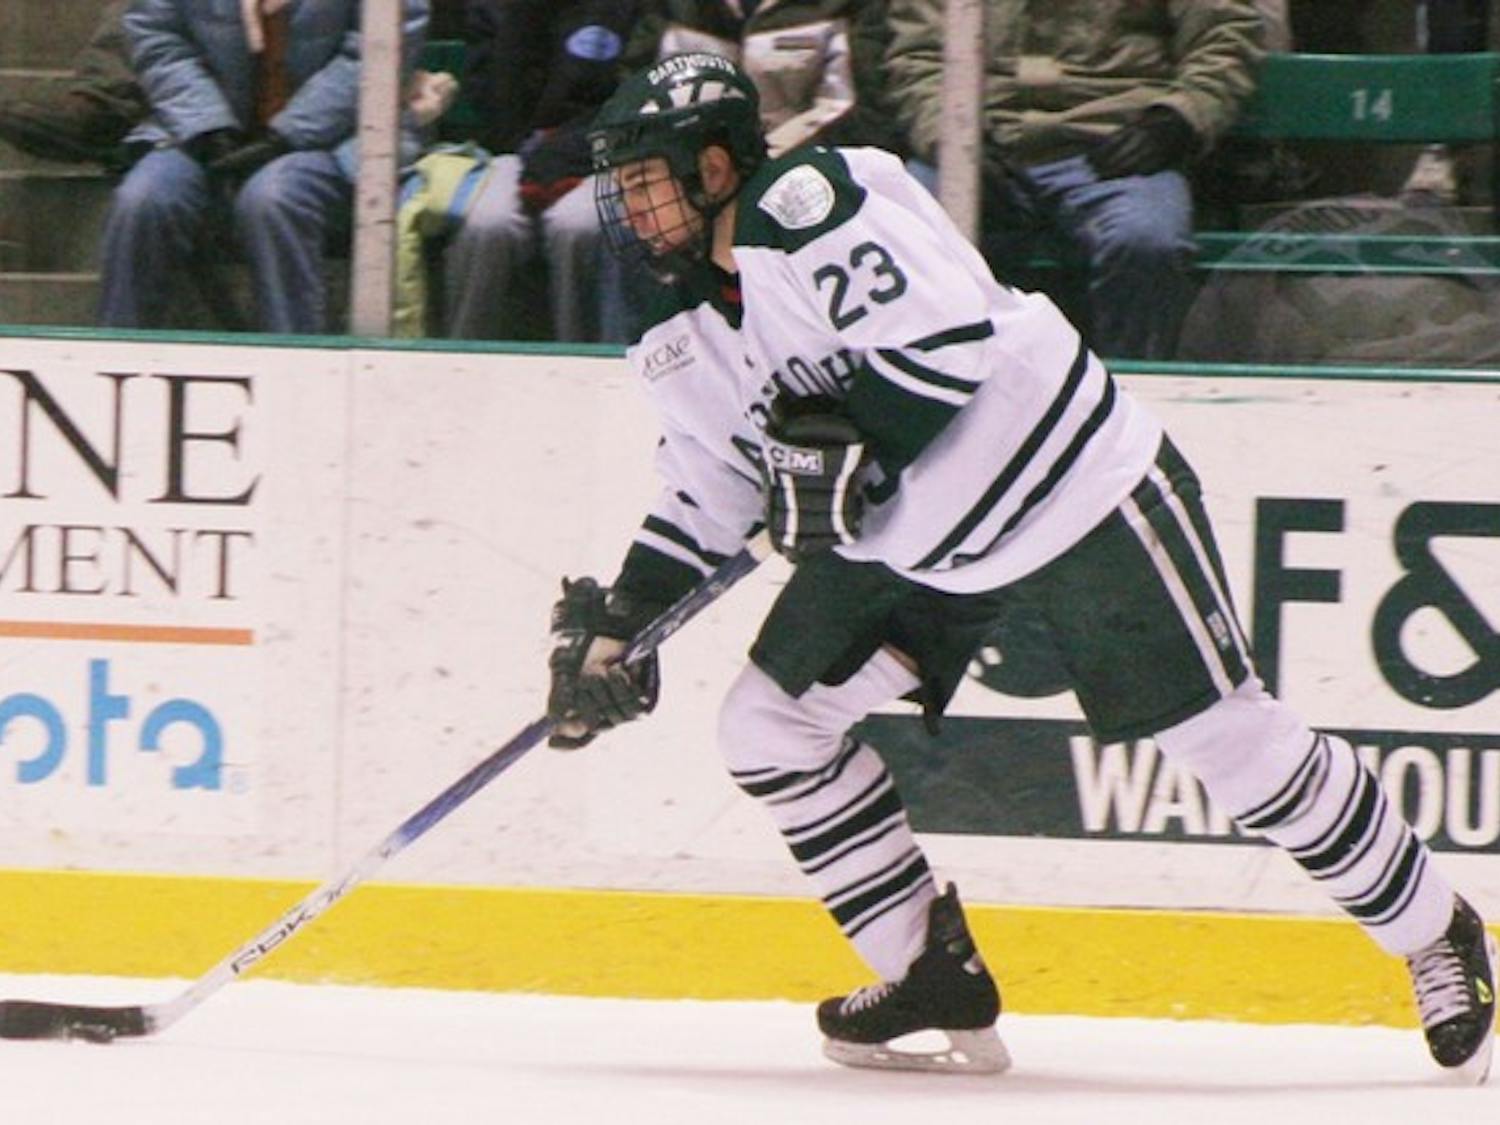 David Jones '08 will look to become the College's next NHL standout.